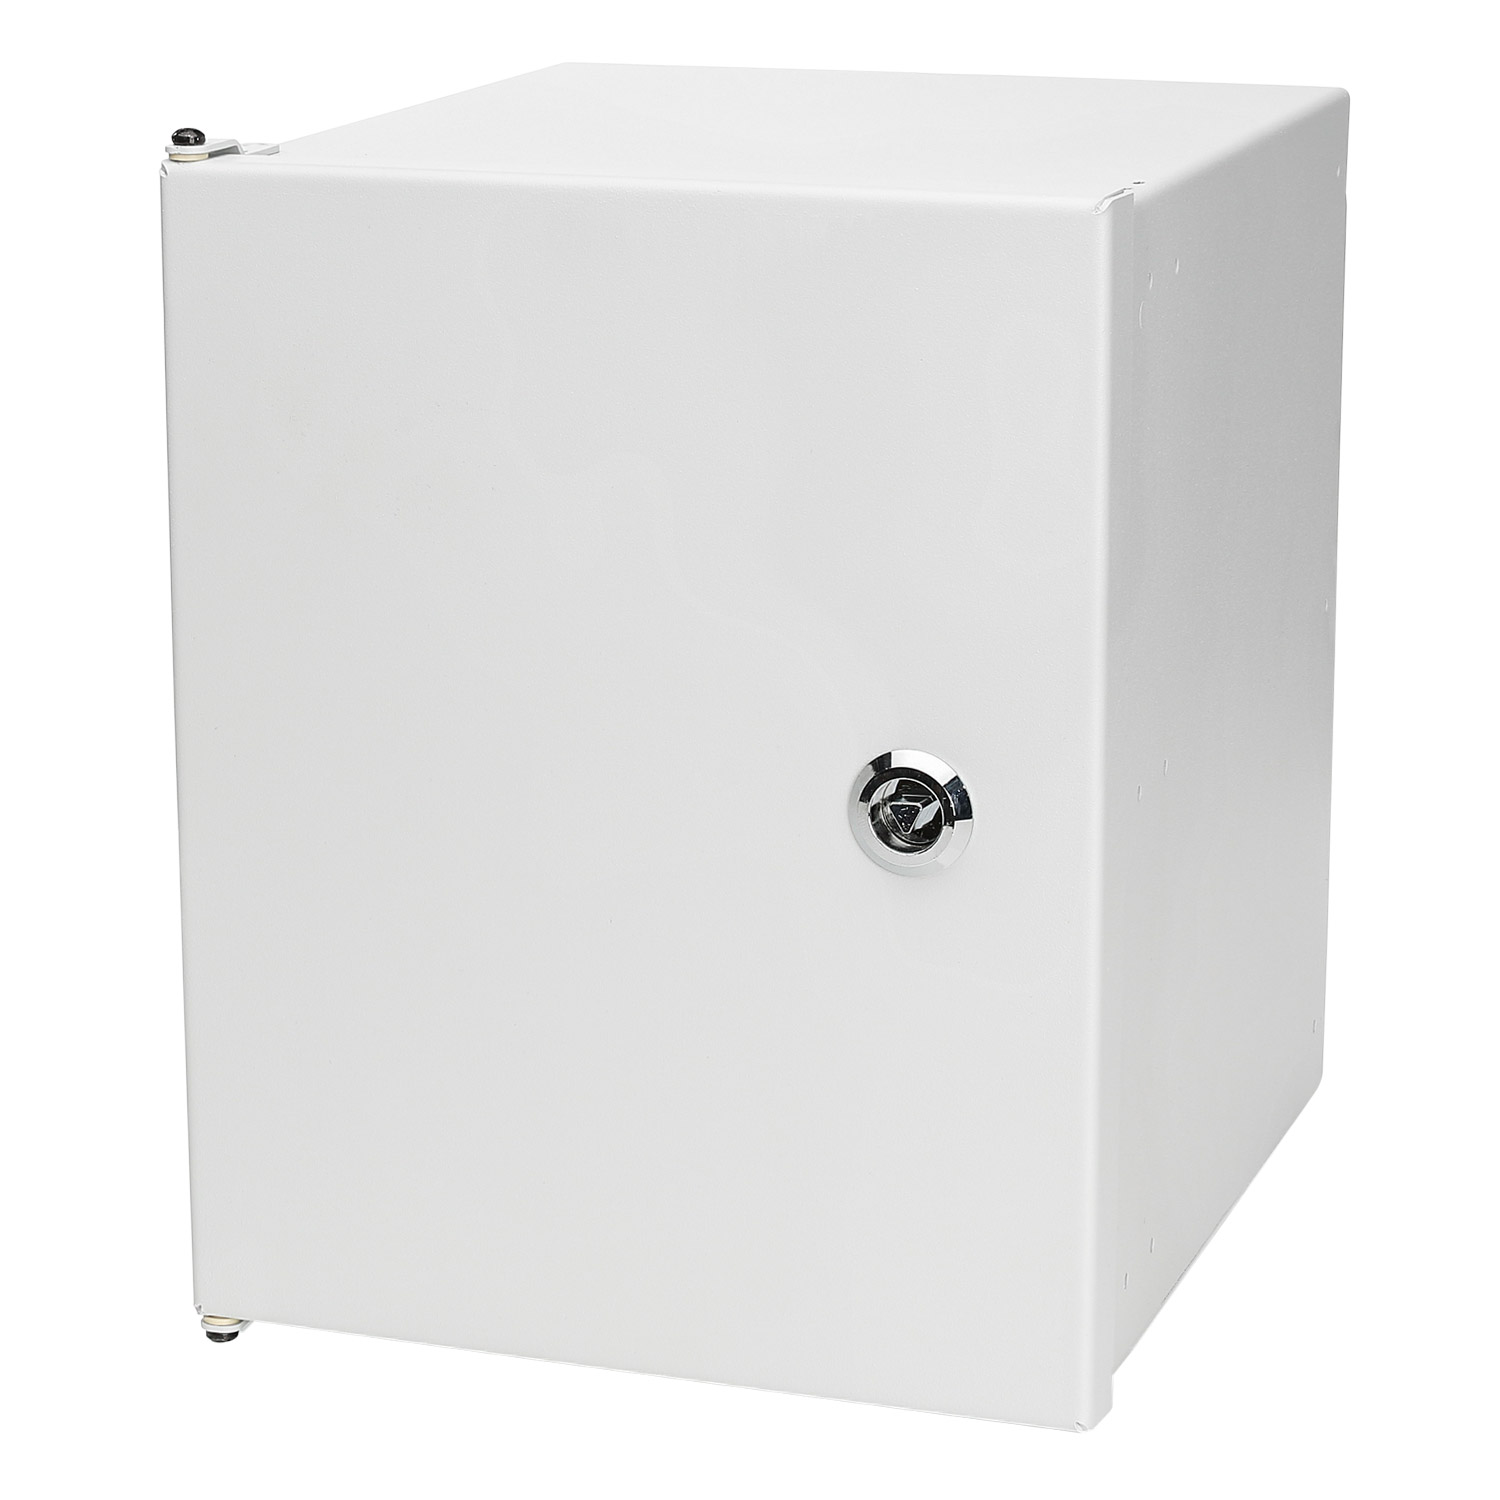 SYSBOARD Modular Wall Housing for SYSBOXX-Module, width: 237 mm, height: 298 mm, white